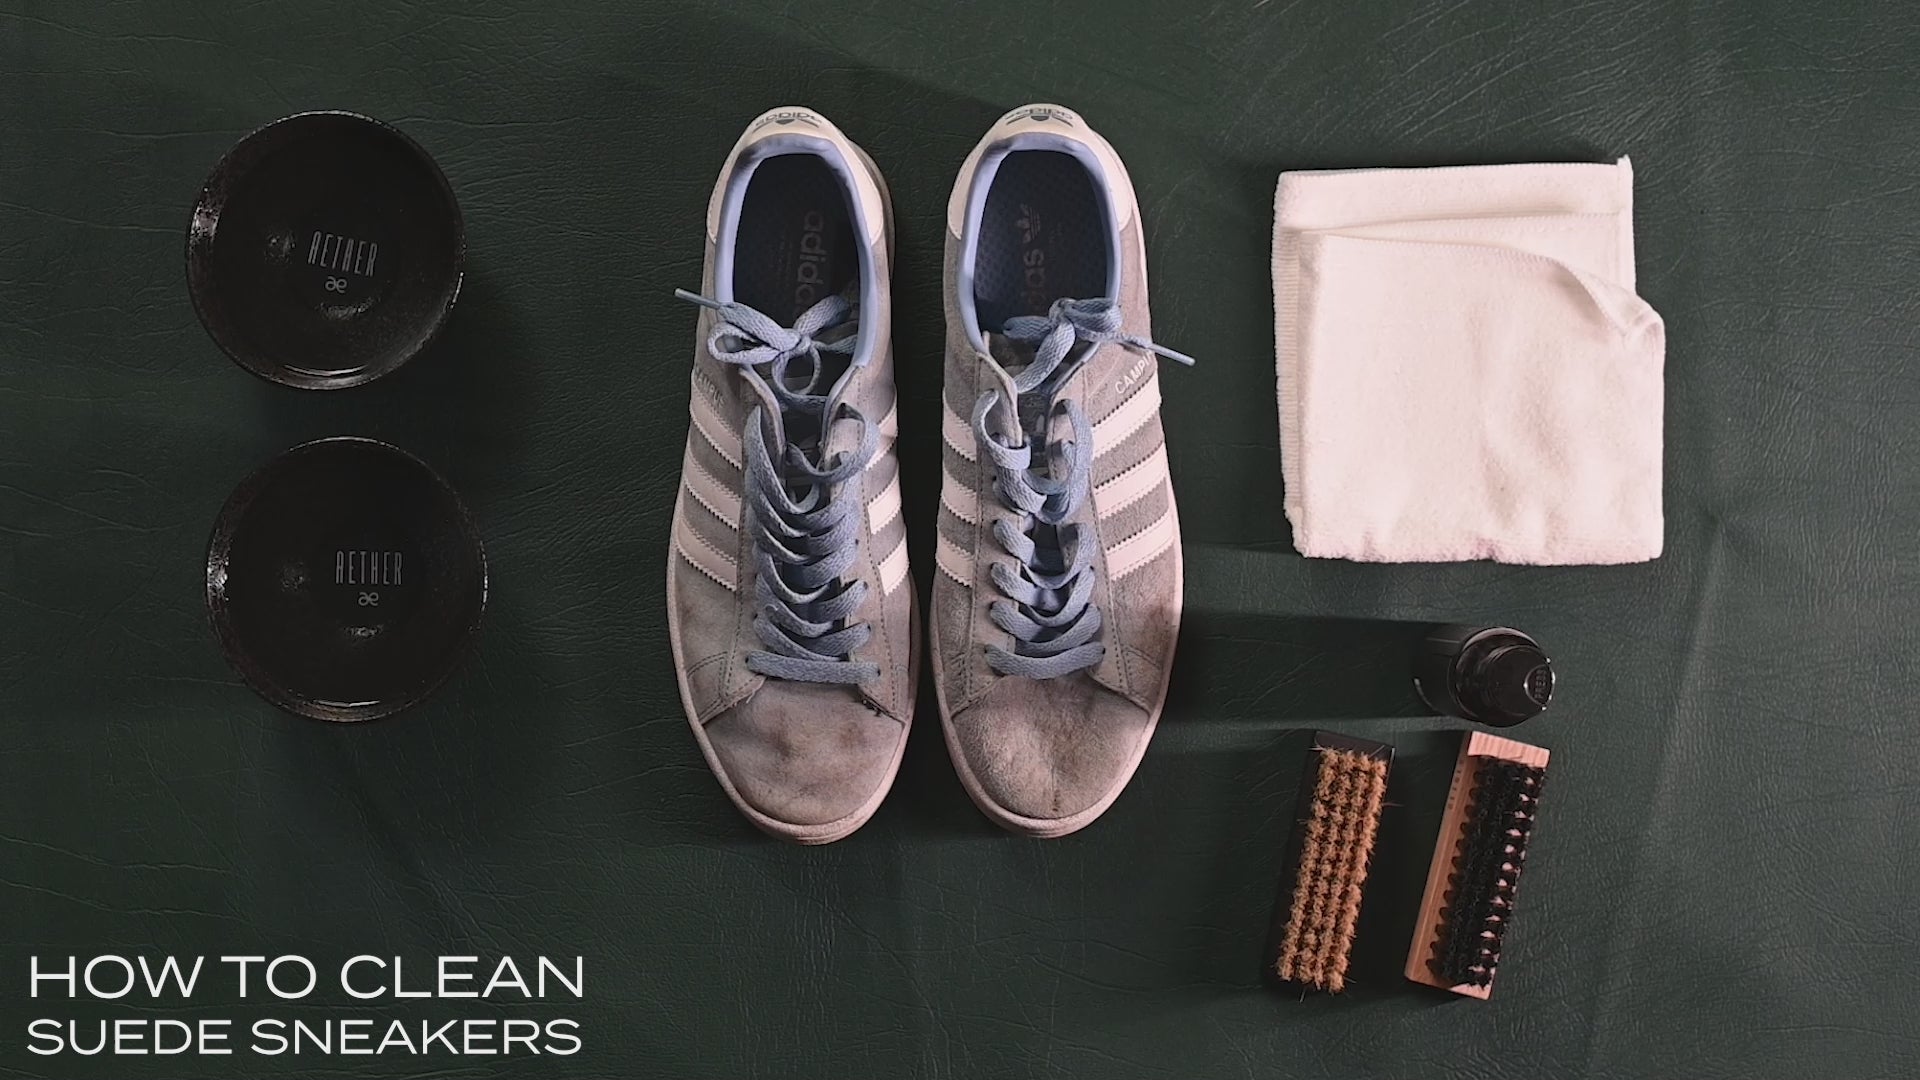 How Can I Waterproof My Shoes and Keep Them Looking Great? - aethercare